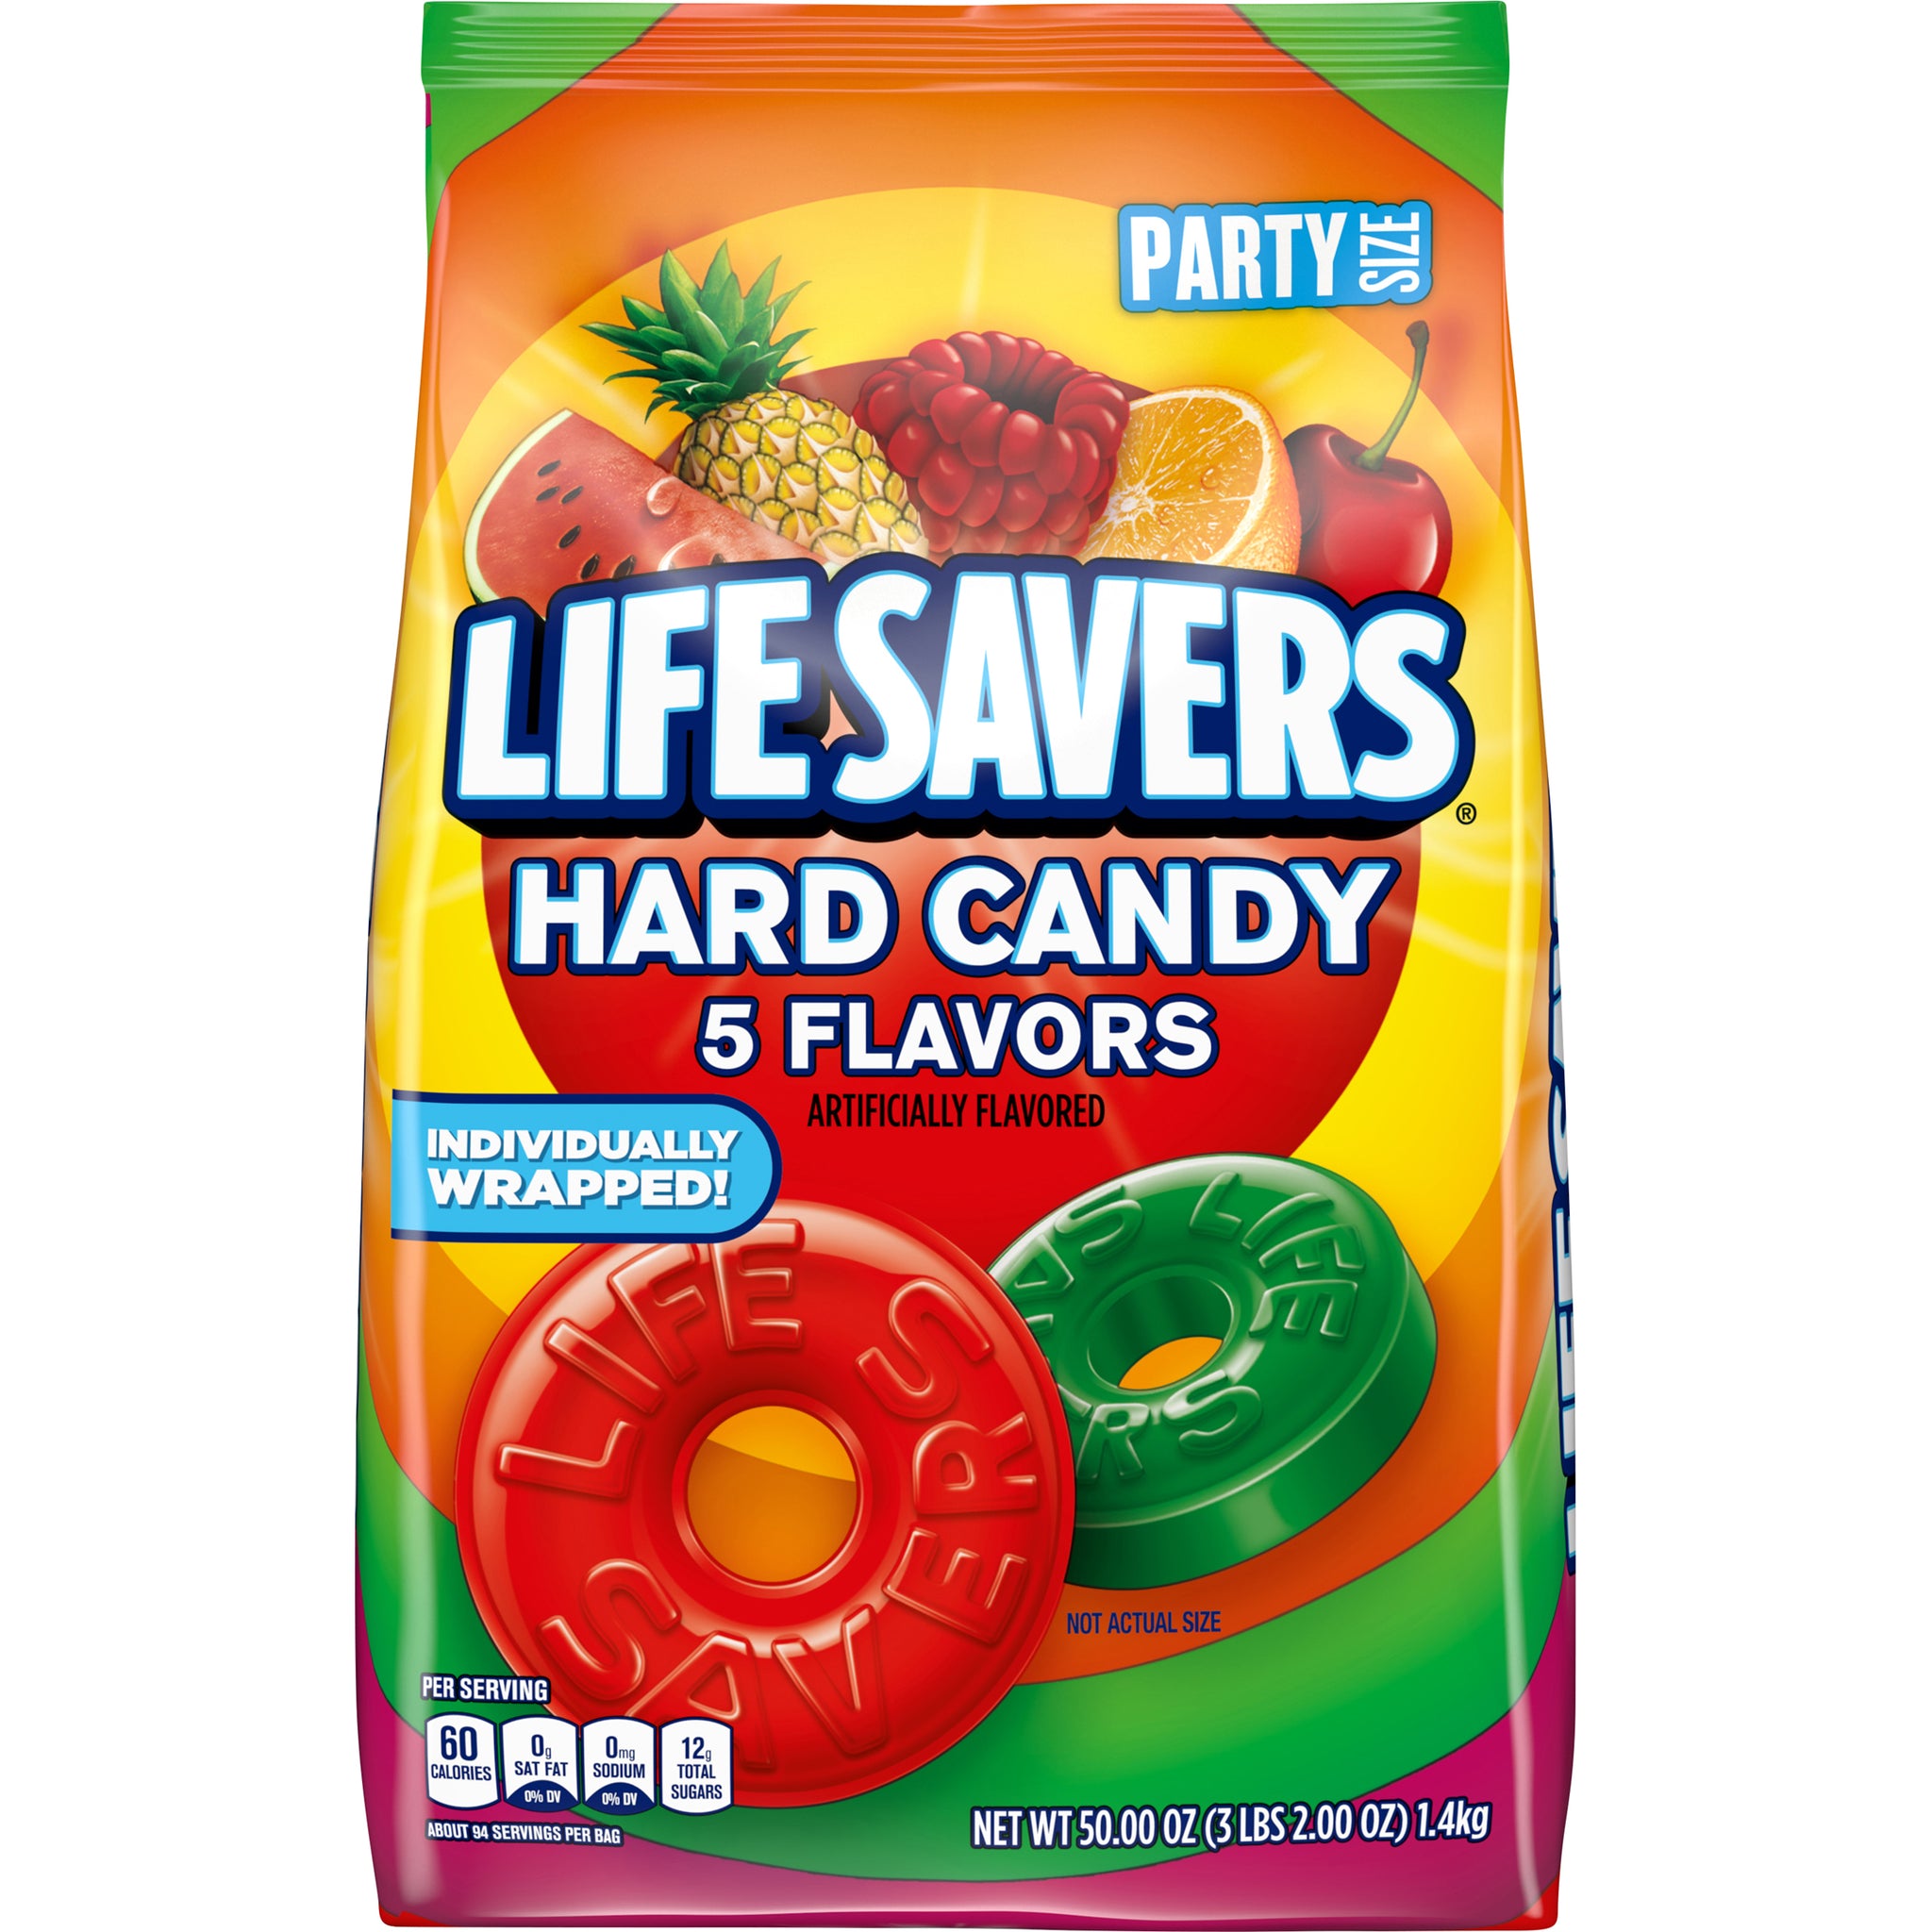 Life Savers 5 Flavors Hard Candy, Party Size, 50oz